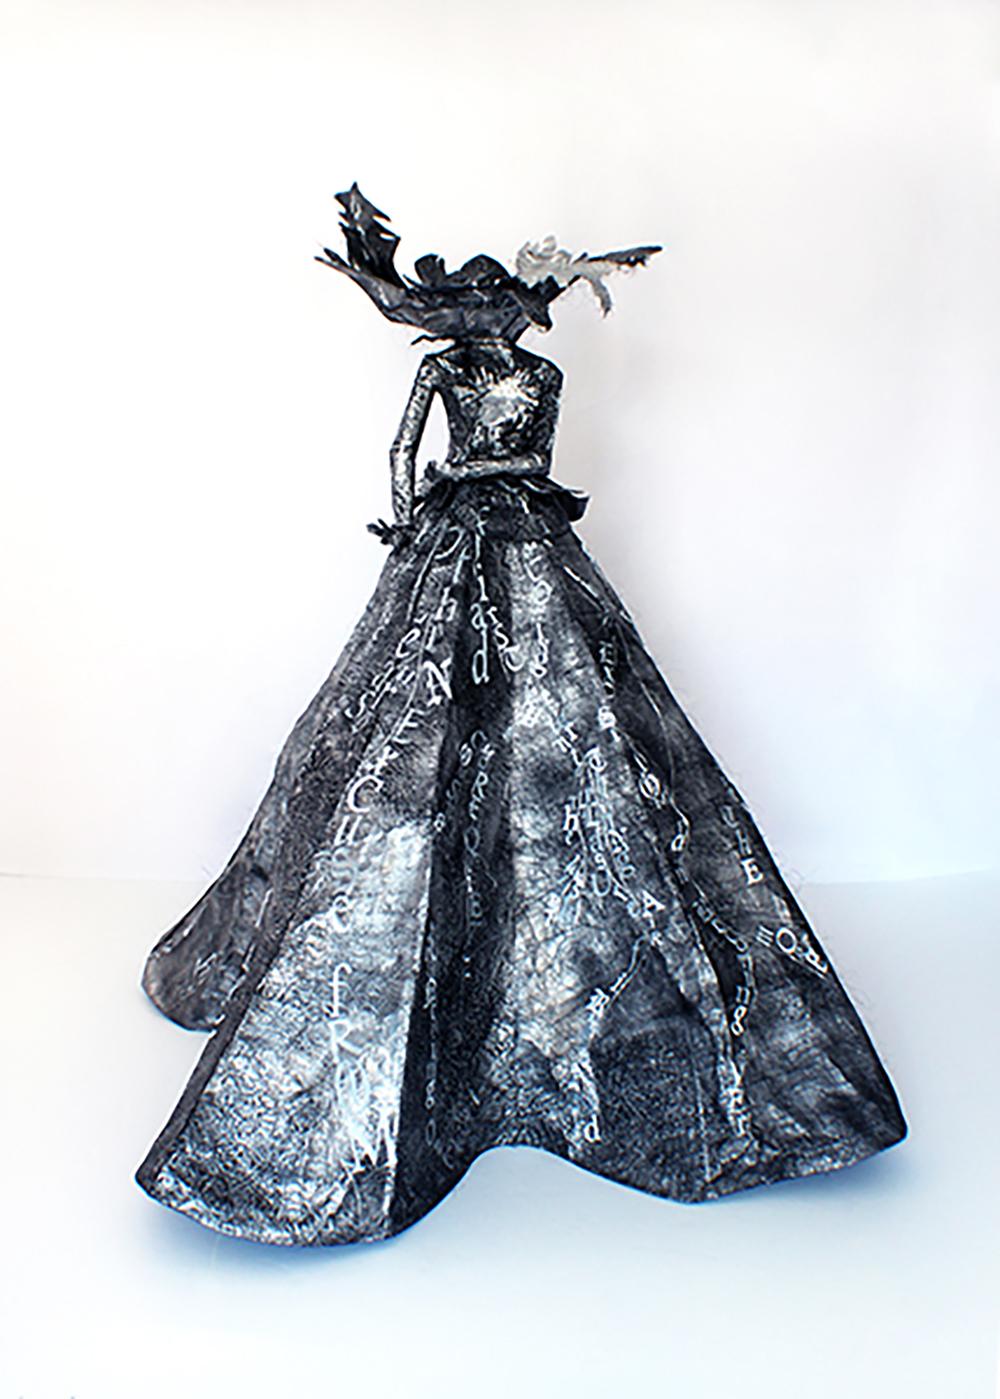 Lesley Dill Figurative Sculpture - BIG HEART GOWN 